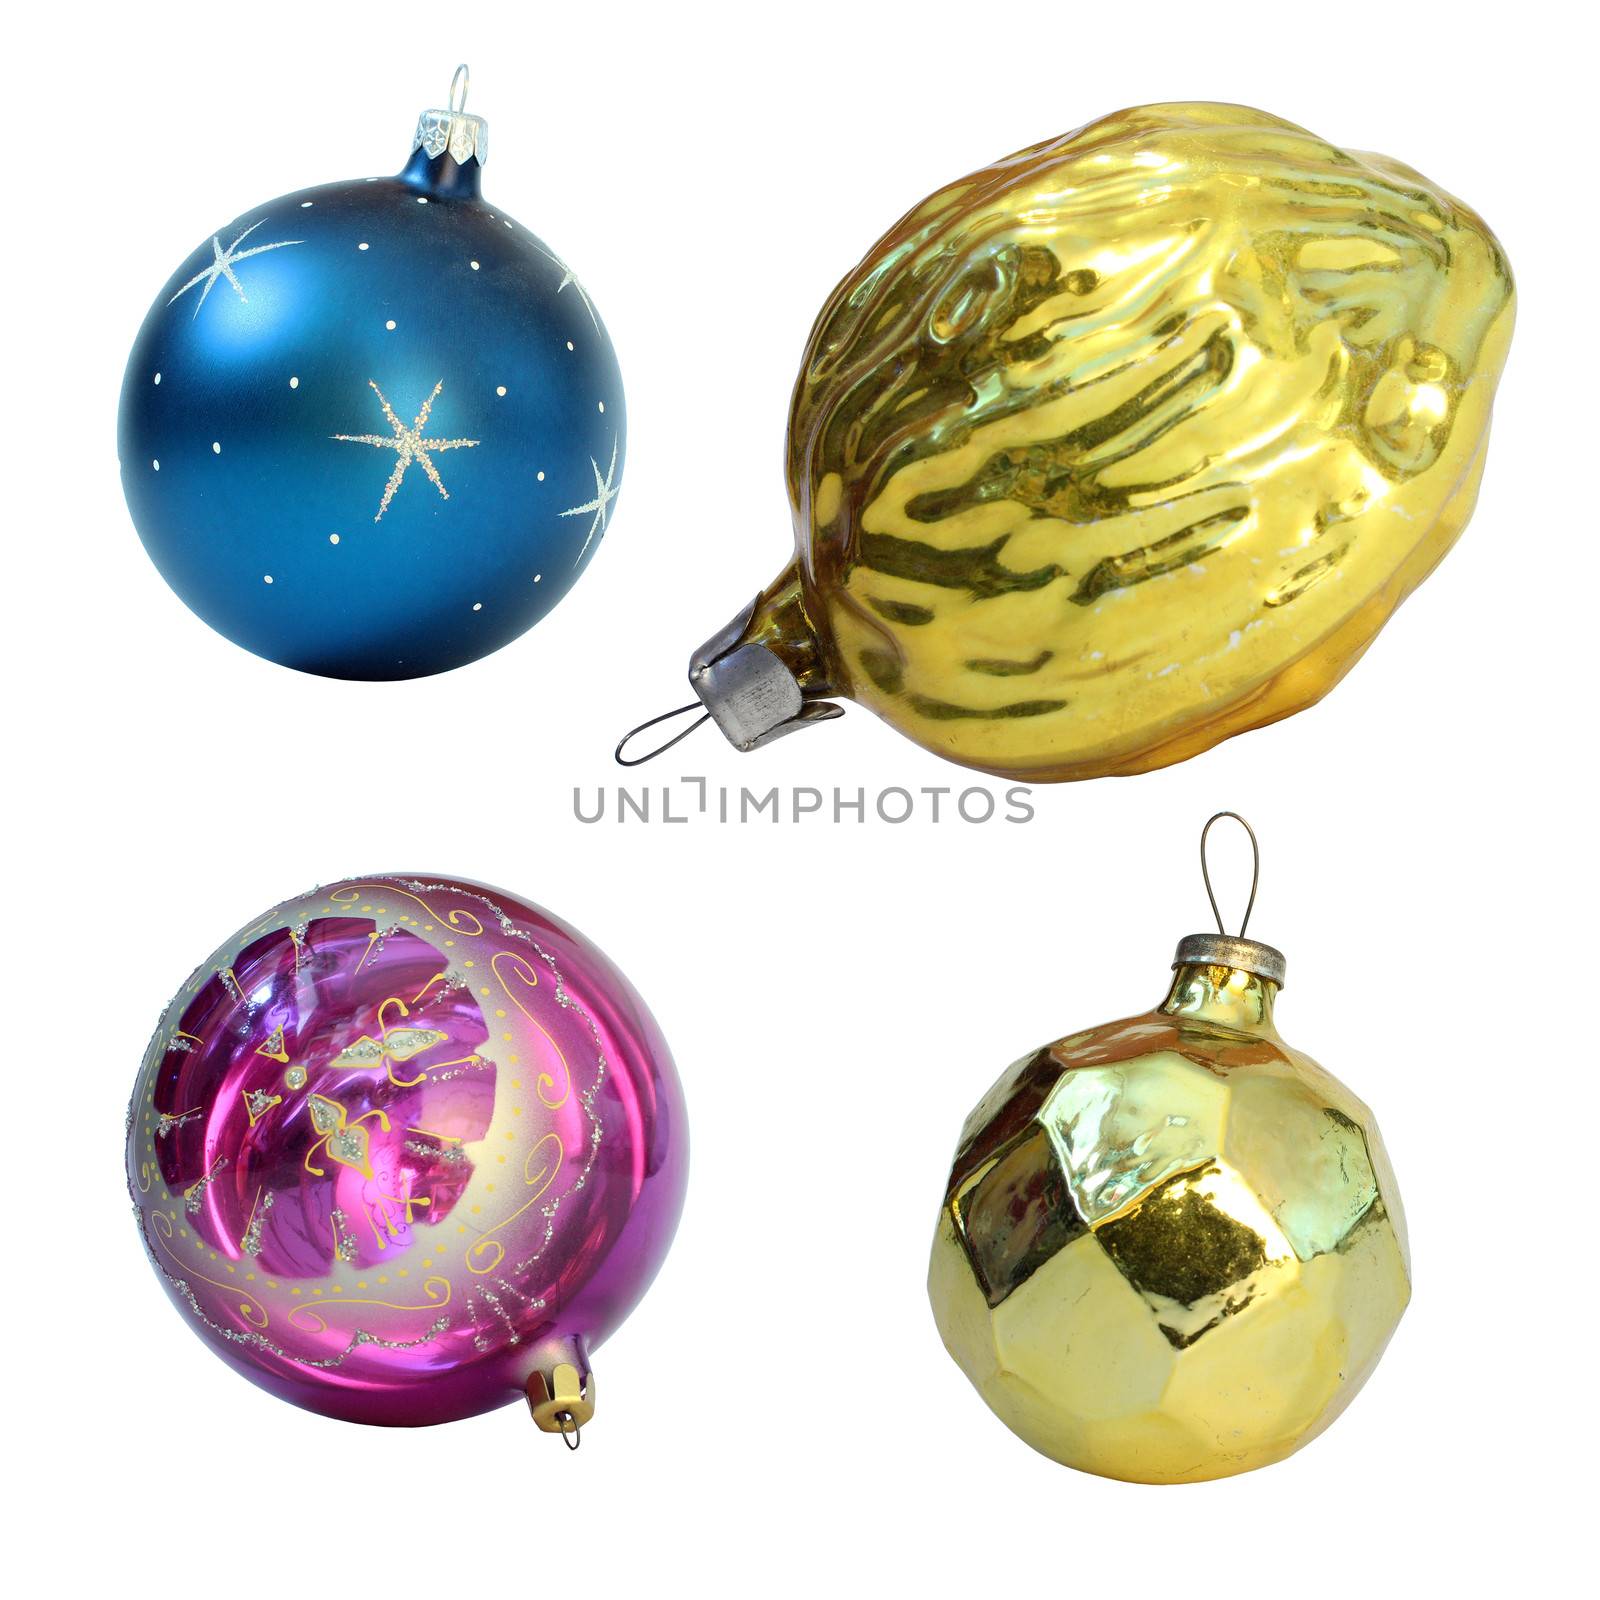 Christmas toys. Isolated on white background. Balls and gold nut